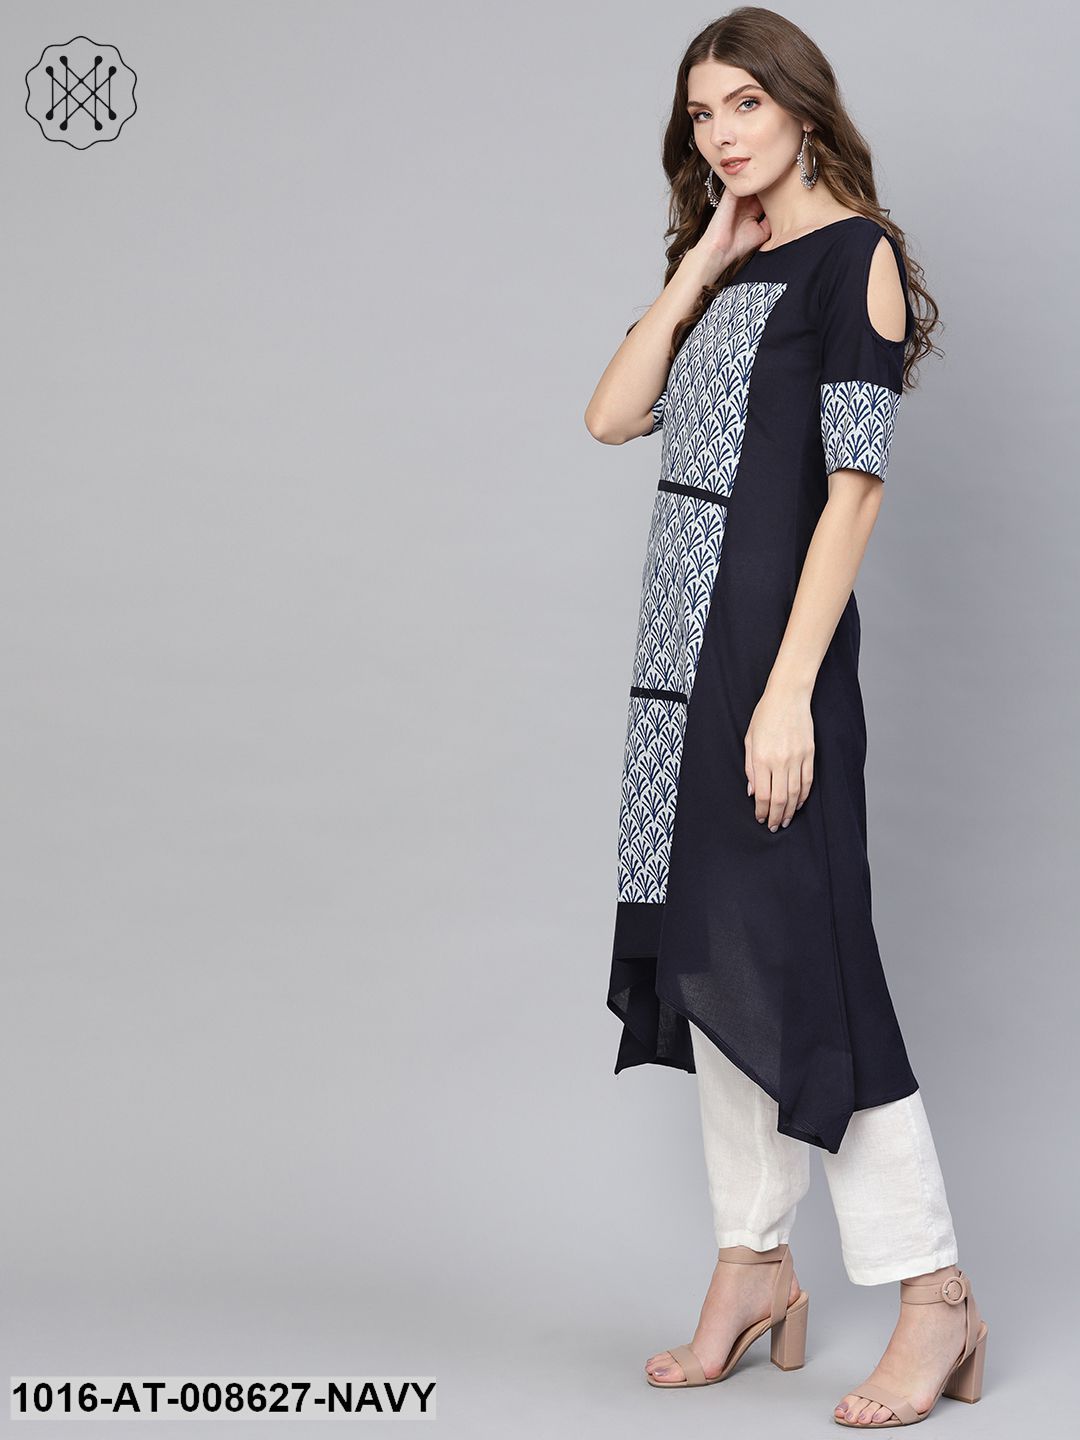 Solid Navy Blue Asymetric A-Line Kurti With Navy Blue Floral Printed Patches On The Yoke With A Boat Neck And Elbow Sleeves